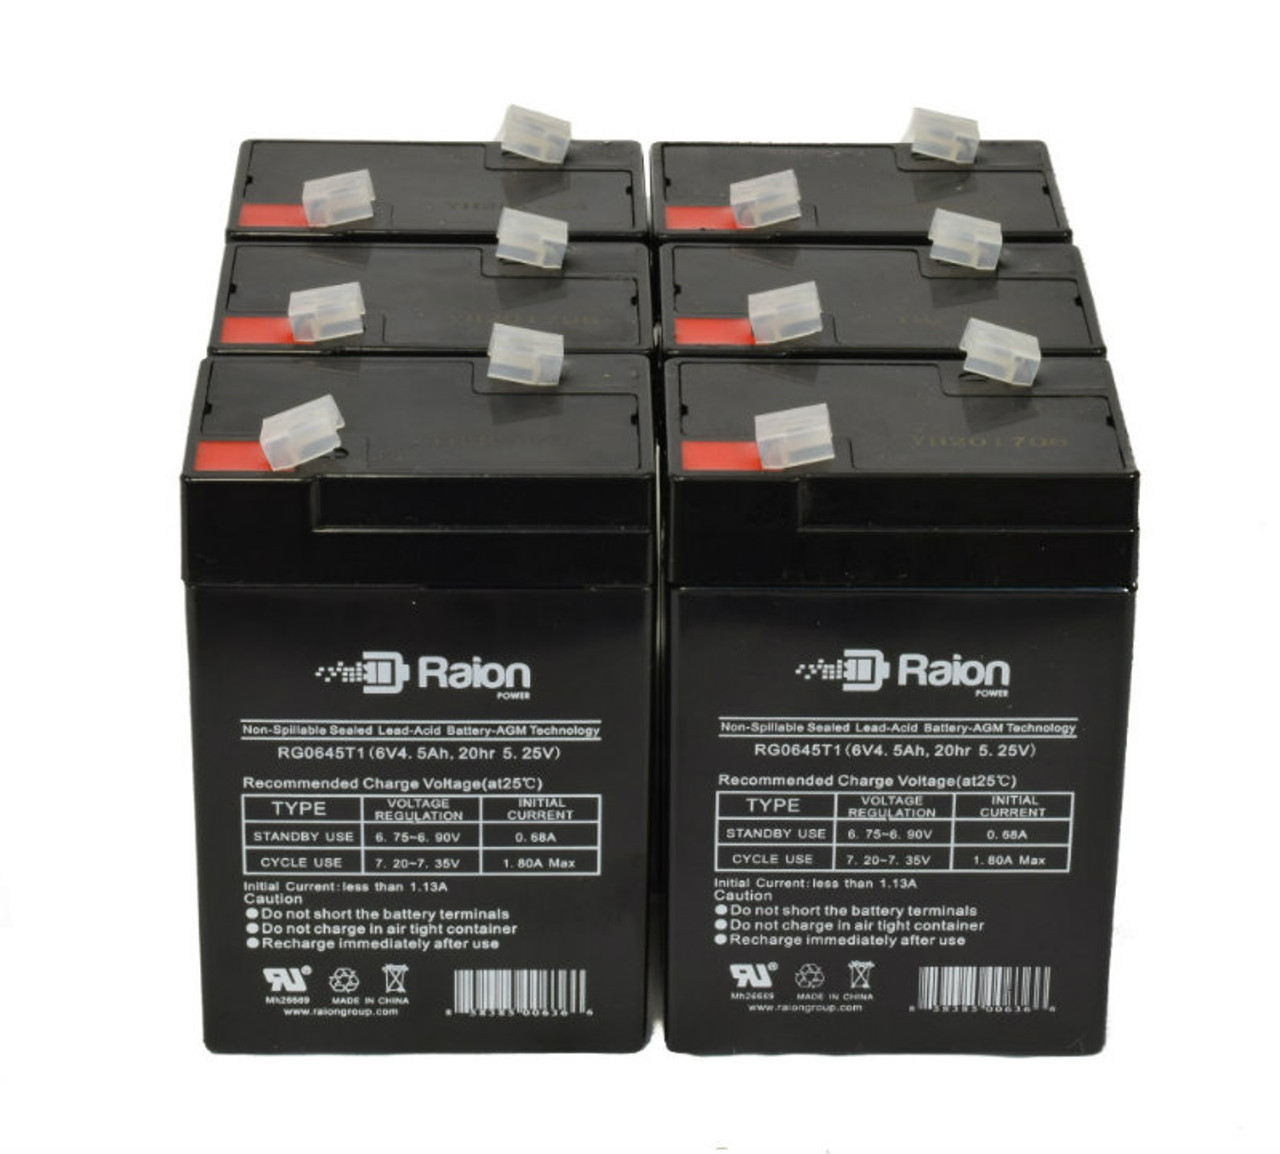 Raion Power 6 Volt 4.5Ah RG0645T1 Replacement Battery for Double Tech DB6-4.5 - 6 Pack